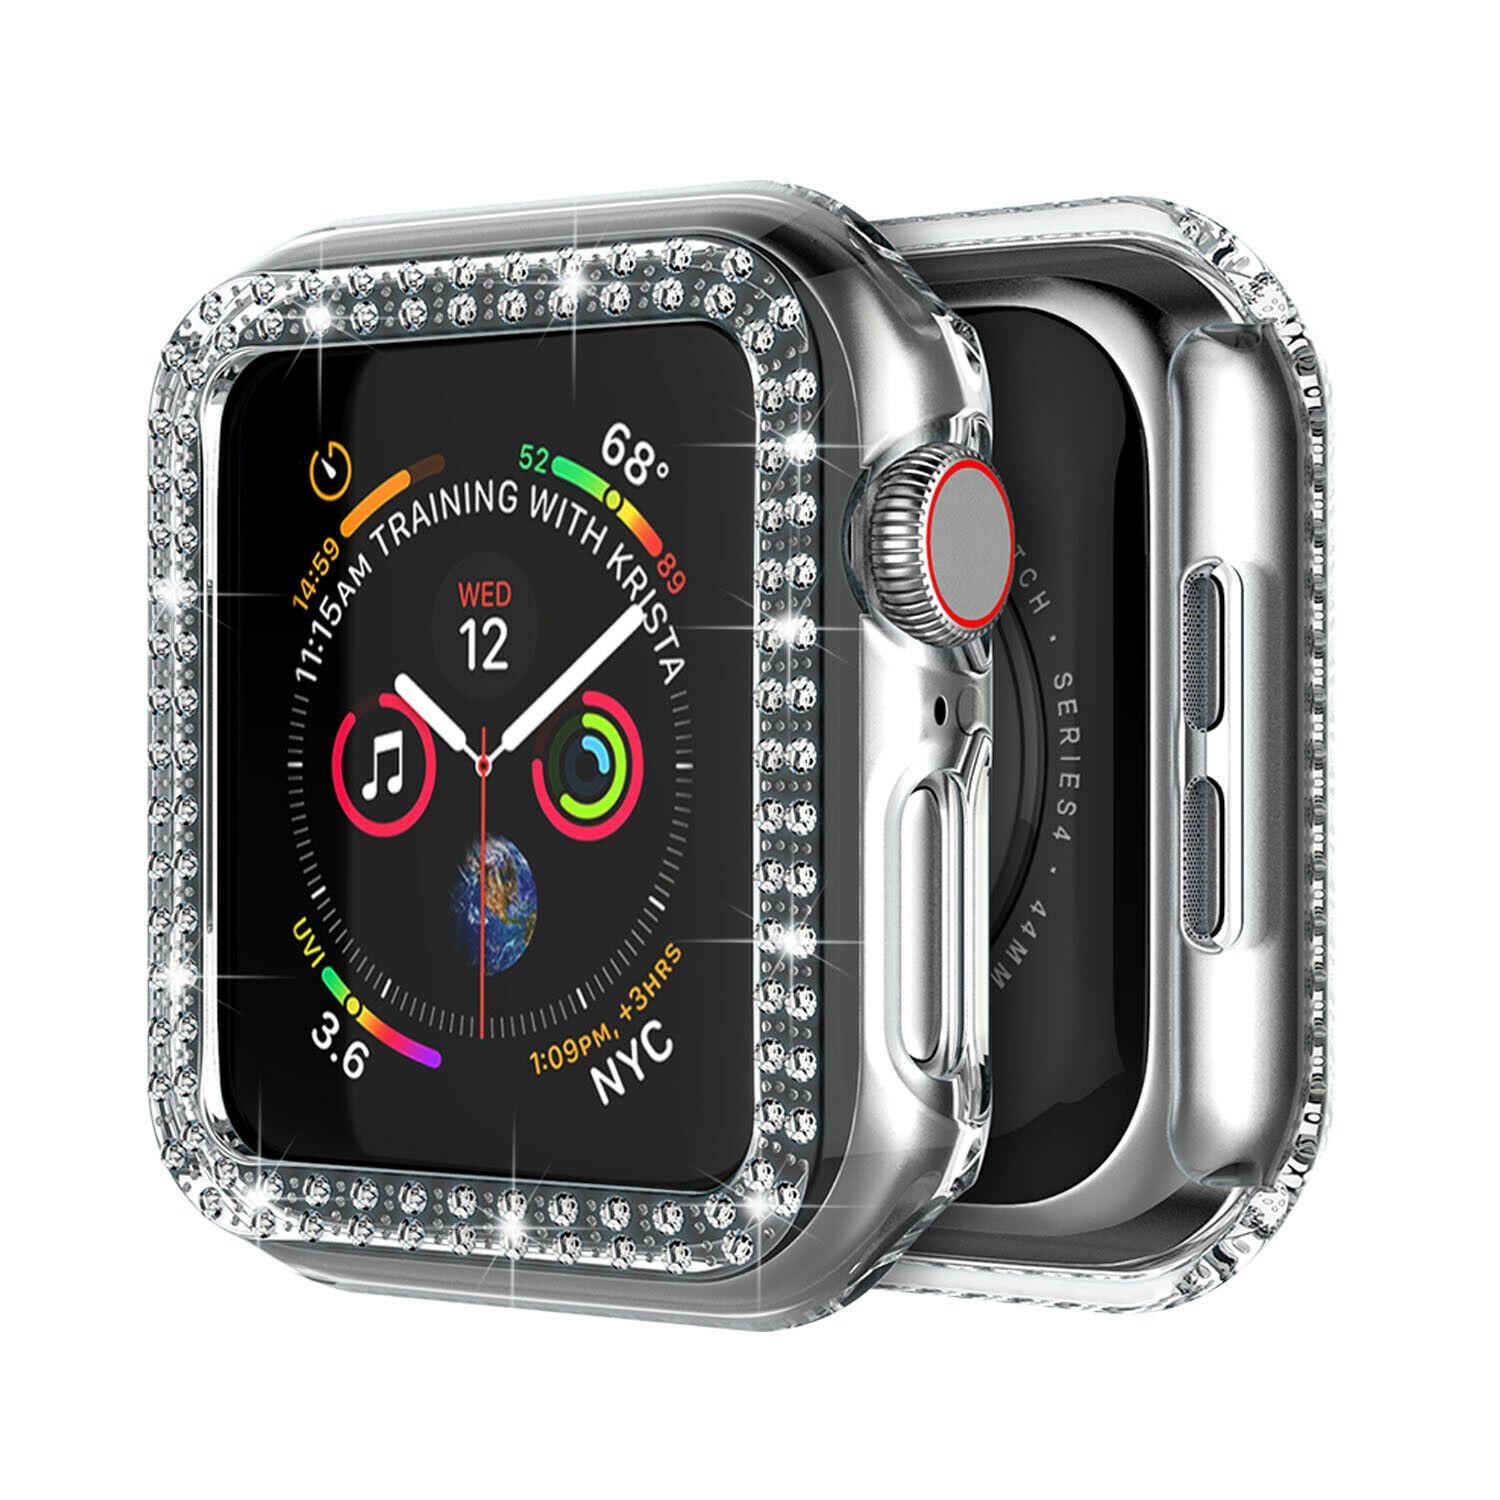 Crystal Diamond Protector Case Cover for Apple Watch 38/40/42/44 mm Series 5/4/3 ebizware Clear 38mm (Series 3/2/1) 